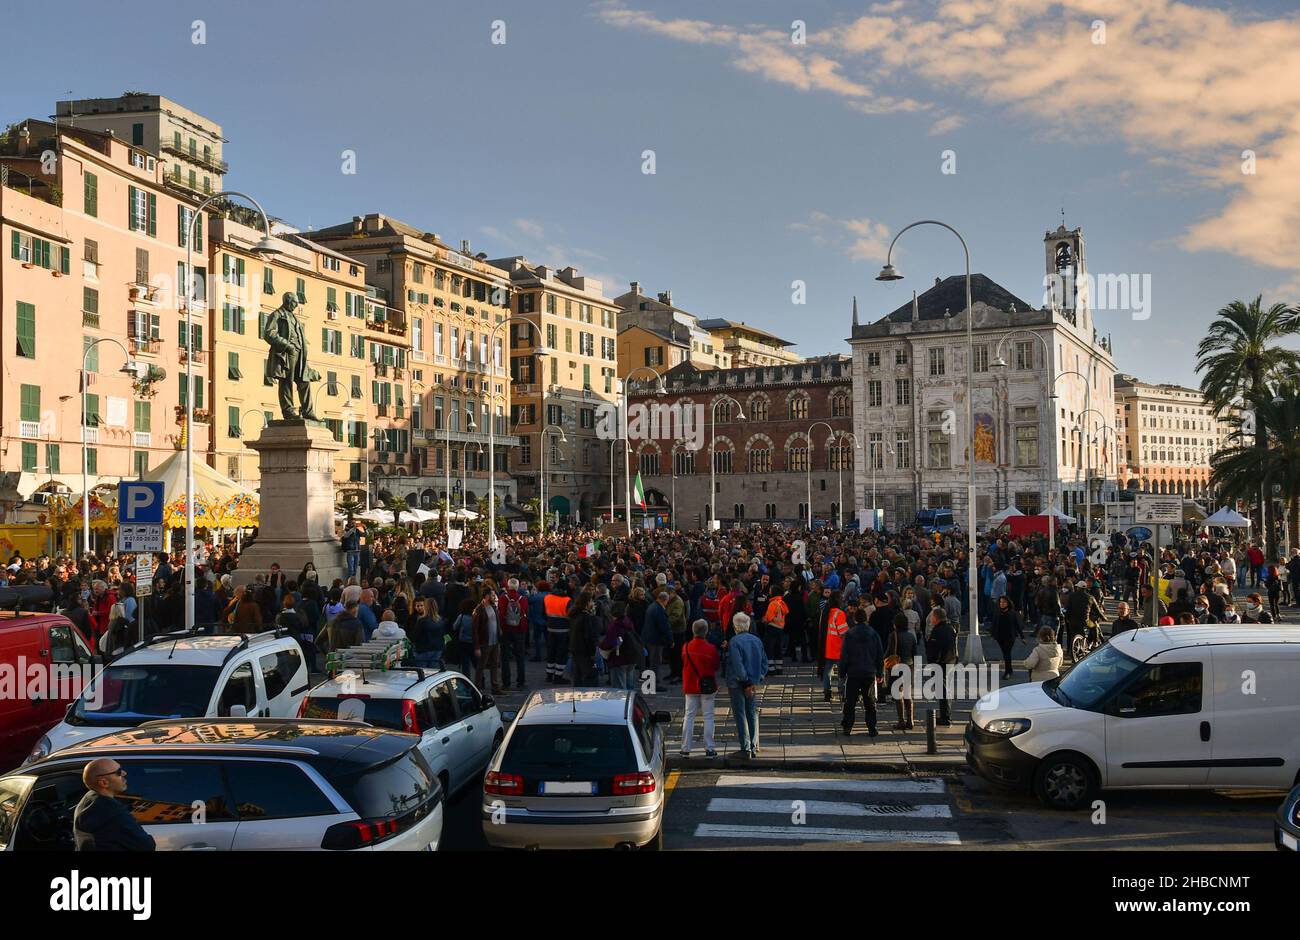 Genoa, Liguria, Italy - 10 23 2021: Crowd of people at a No Green Pass protest rally in Piazza Caricamento, with Palazzo San Giorgio in the background Stock Photo